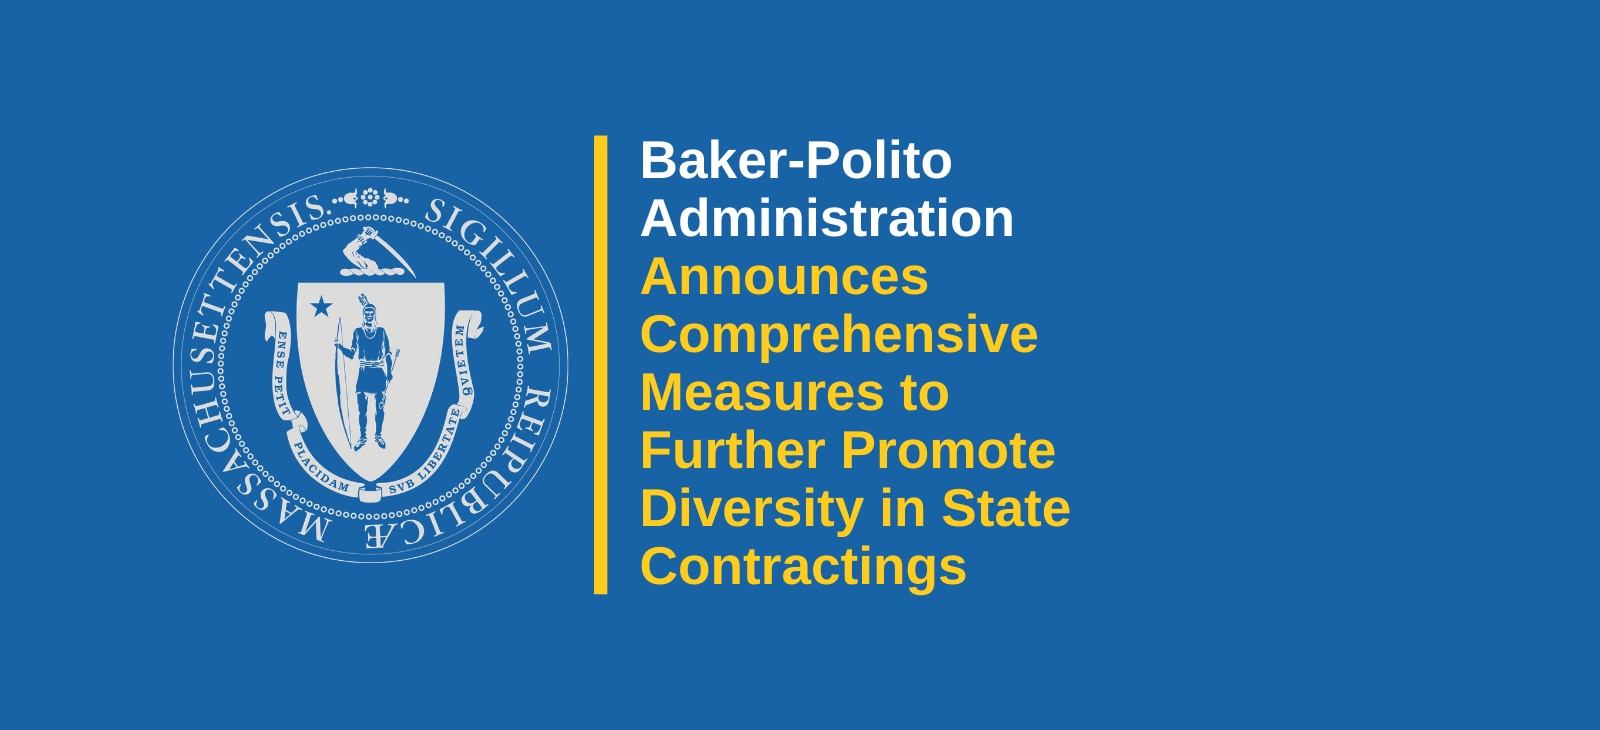 Baker-Polito Administration Announces Comprehensive Measures to Further Promote Diversity in State Contracting